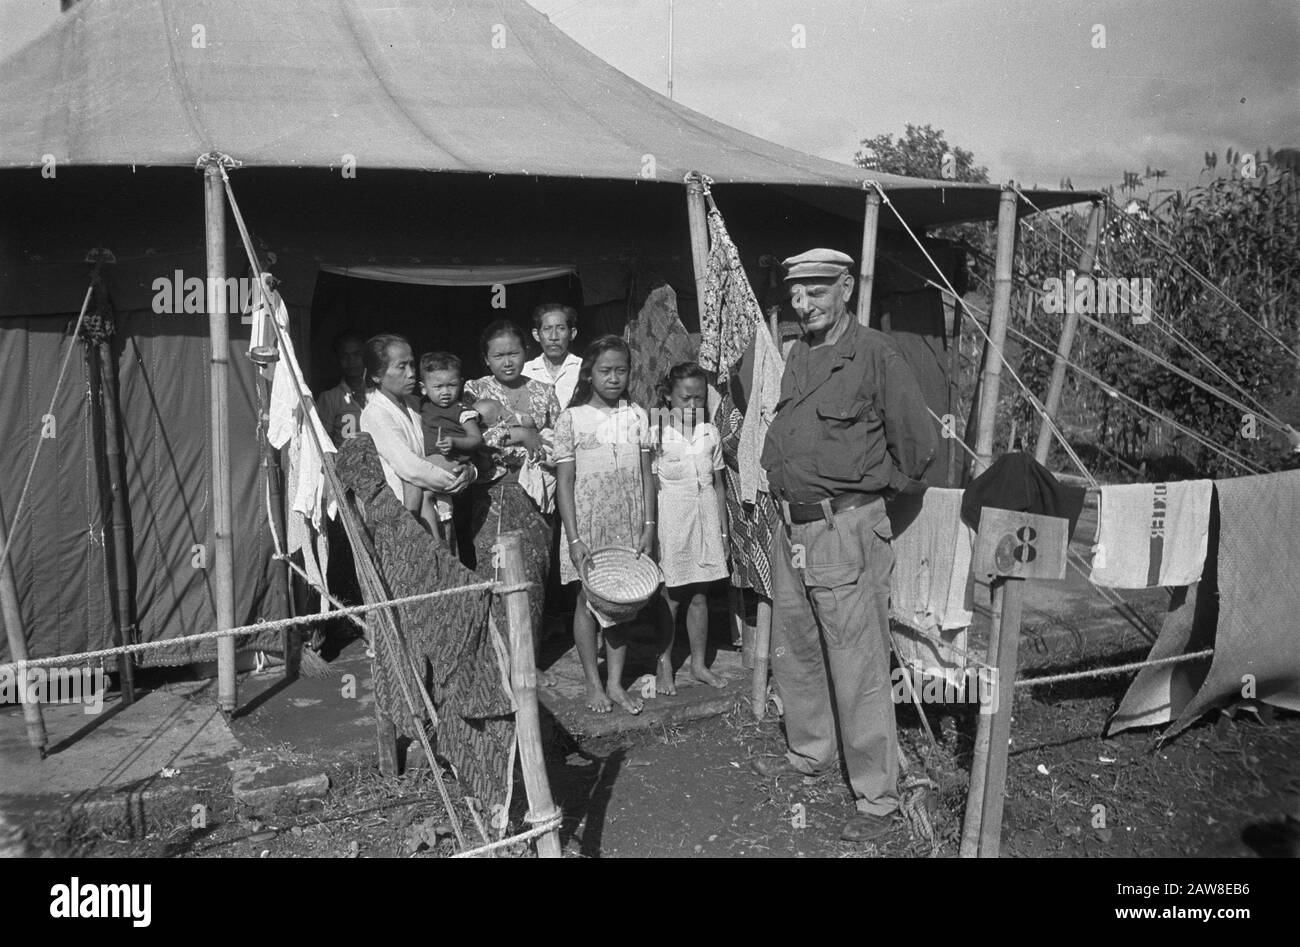 Tent camp in Bandung for Sundanese in the Republic of  Recently, several groups 400 Sundanese who were deported to Djocja in bersiap time, returned to their homeland . They are temporarily housed in a tent camp on the premises of their former employer, the Military Production Companies Bandung. The commander of the LPB-fire, the Lord Dieters, is responsible for the smooth running of the tent camp Date: March 26, 1949 Location: Bandung, Indonesia, Java, Dutch East Indies Stock Photo